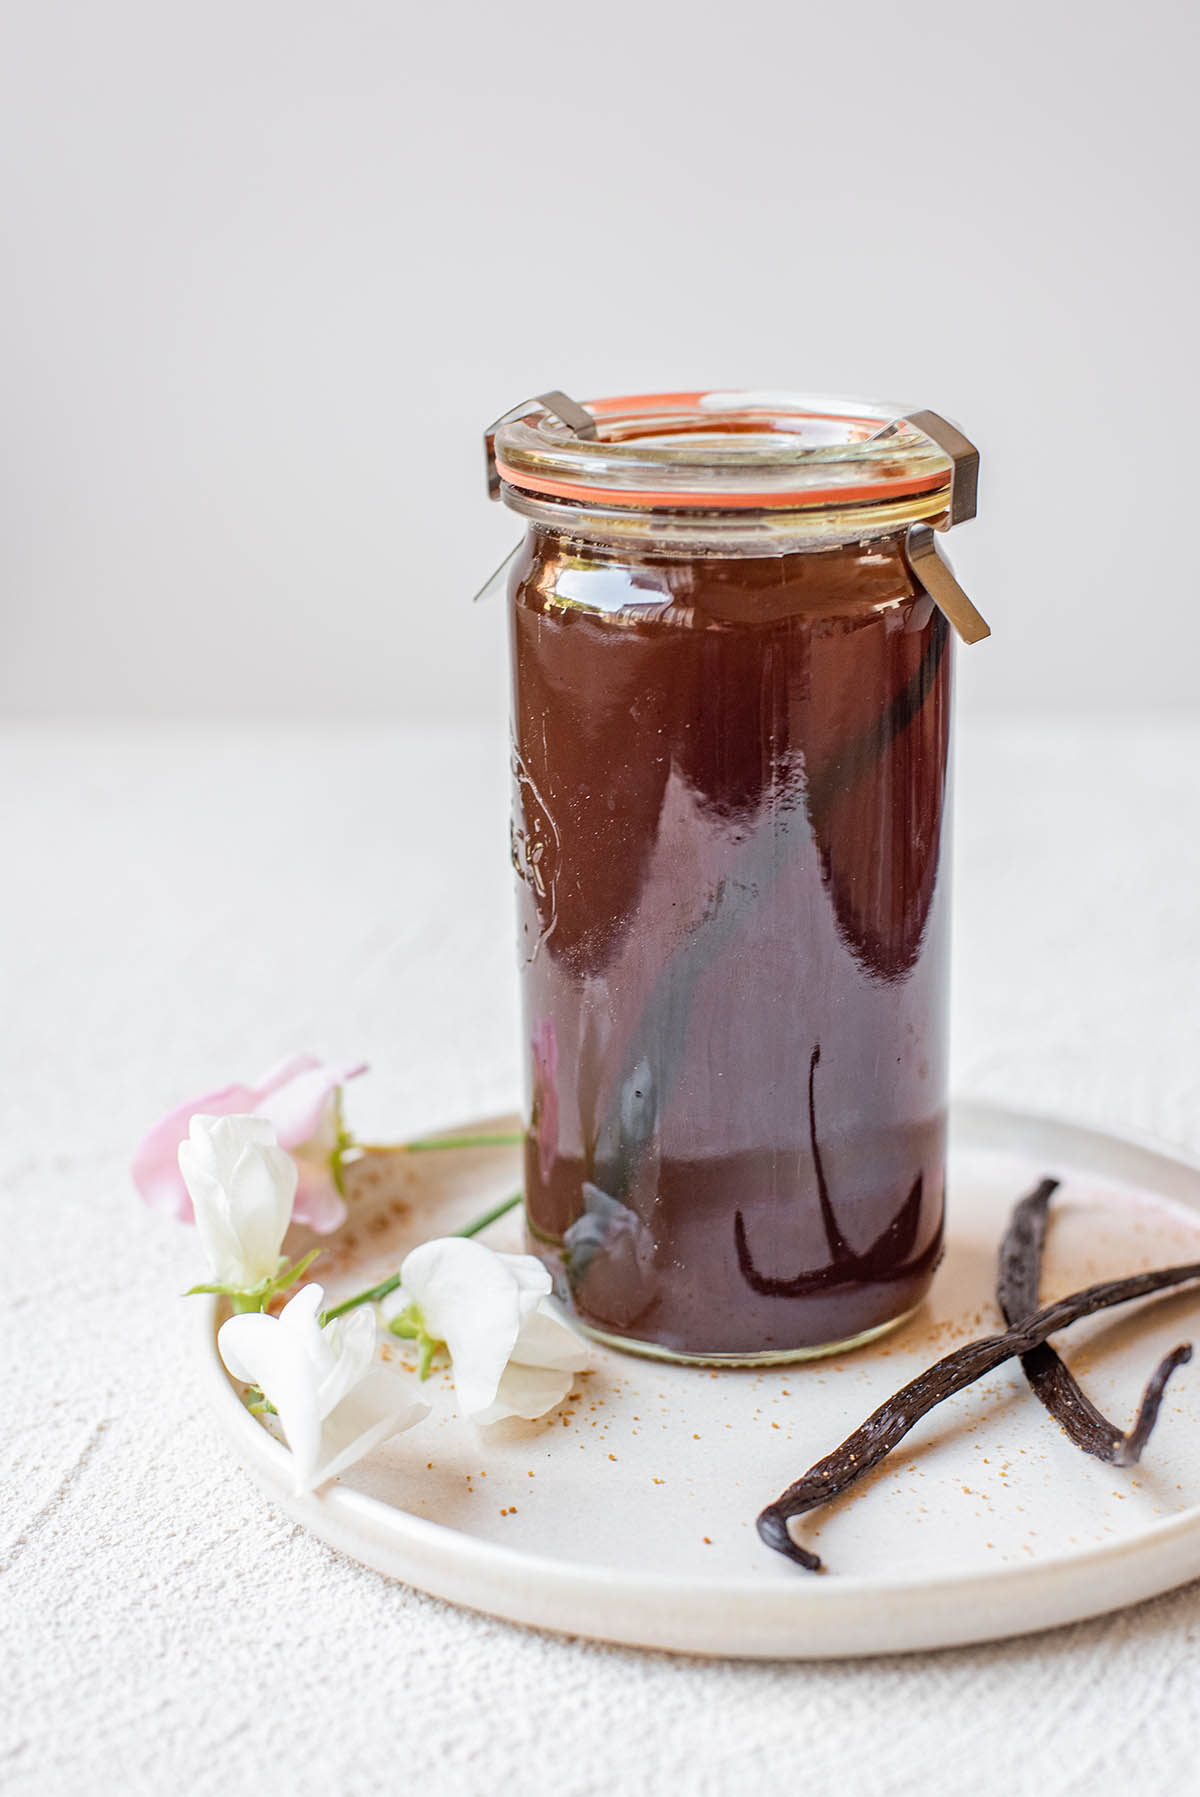 A jar of brown syrup with vanilla beans on a white plate on a white plaster surface with a few sweet pea flowers strewn about.